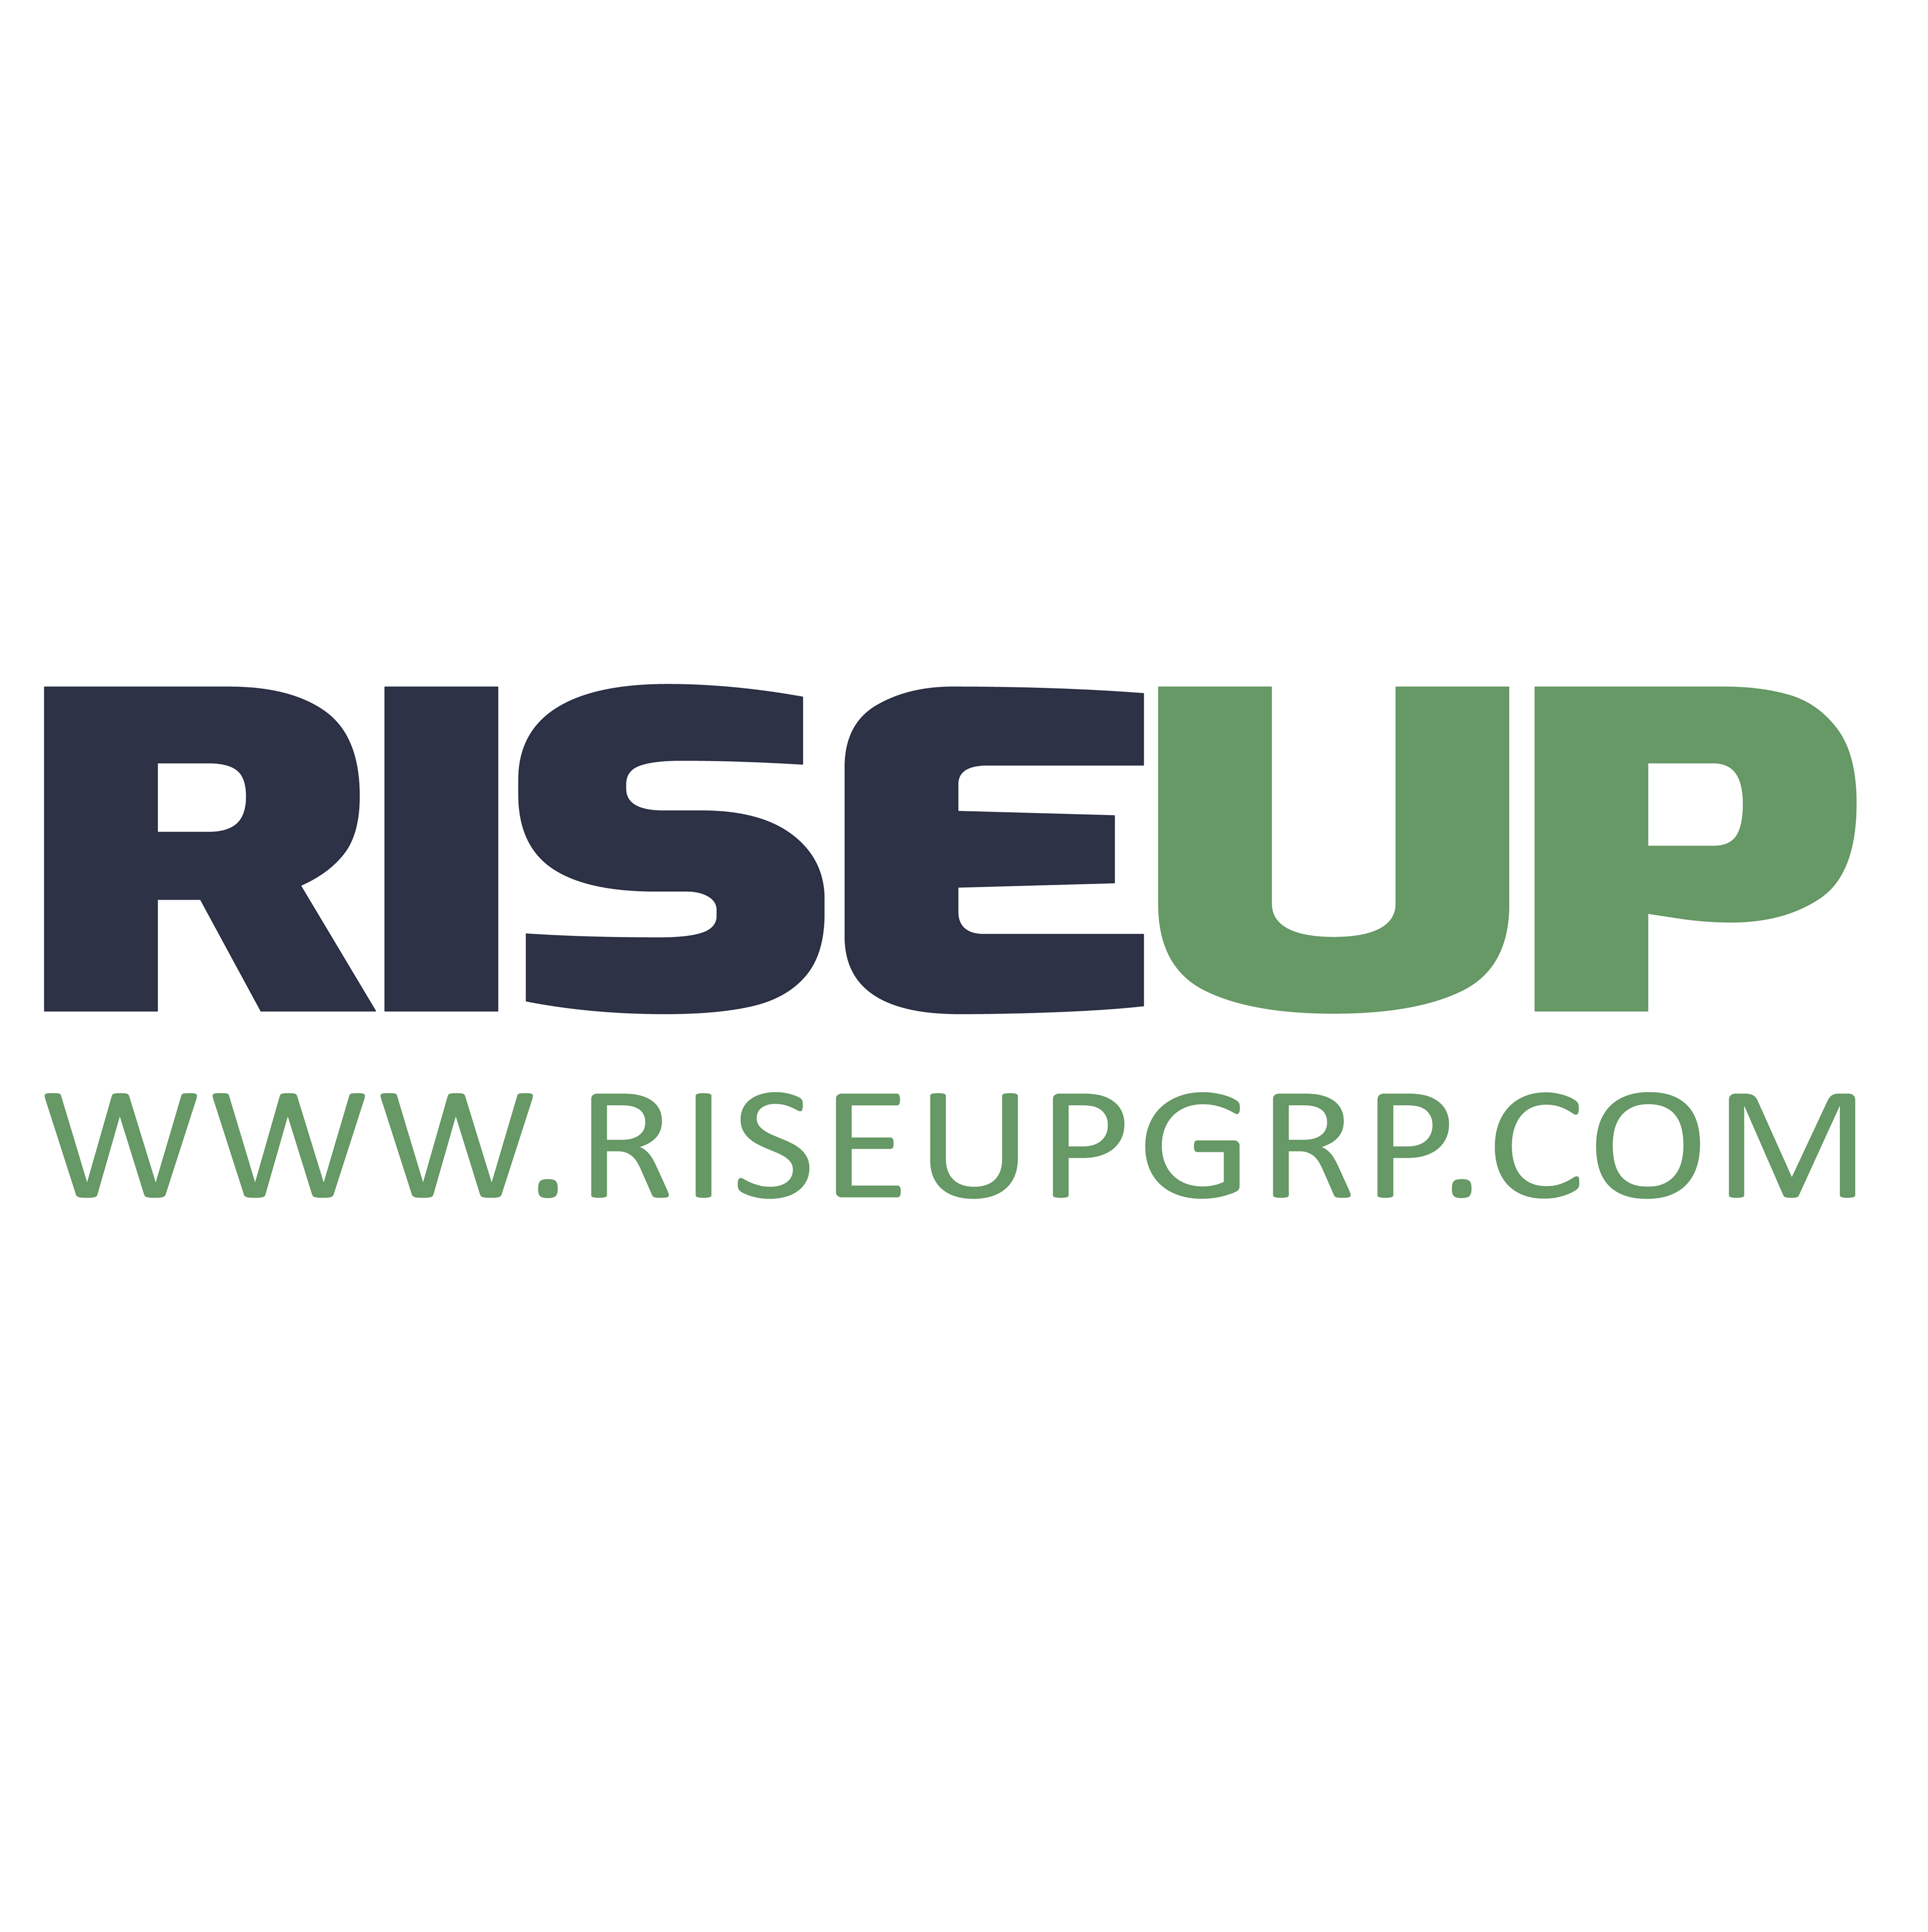 Rise up group